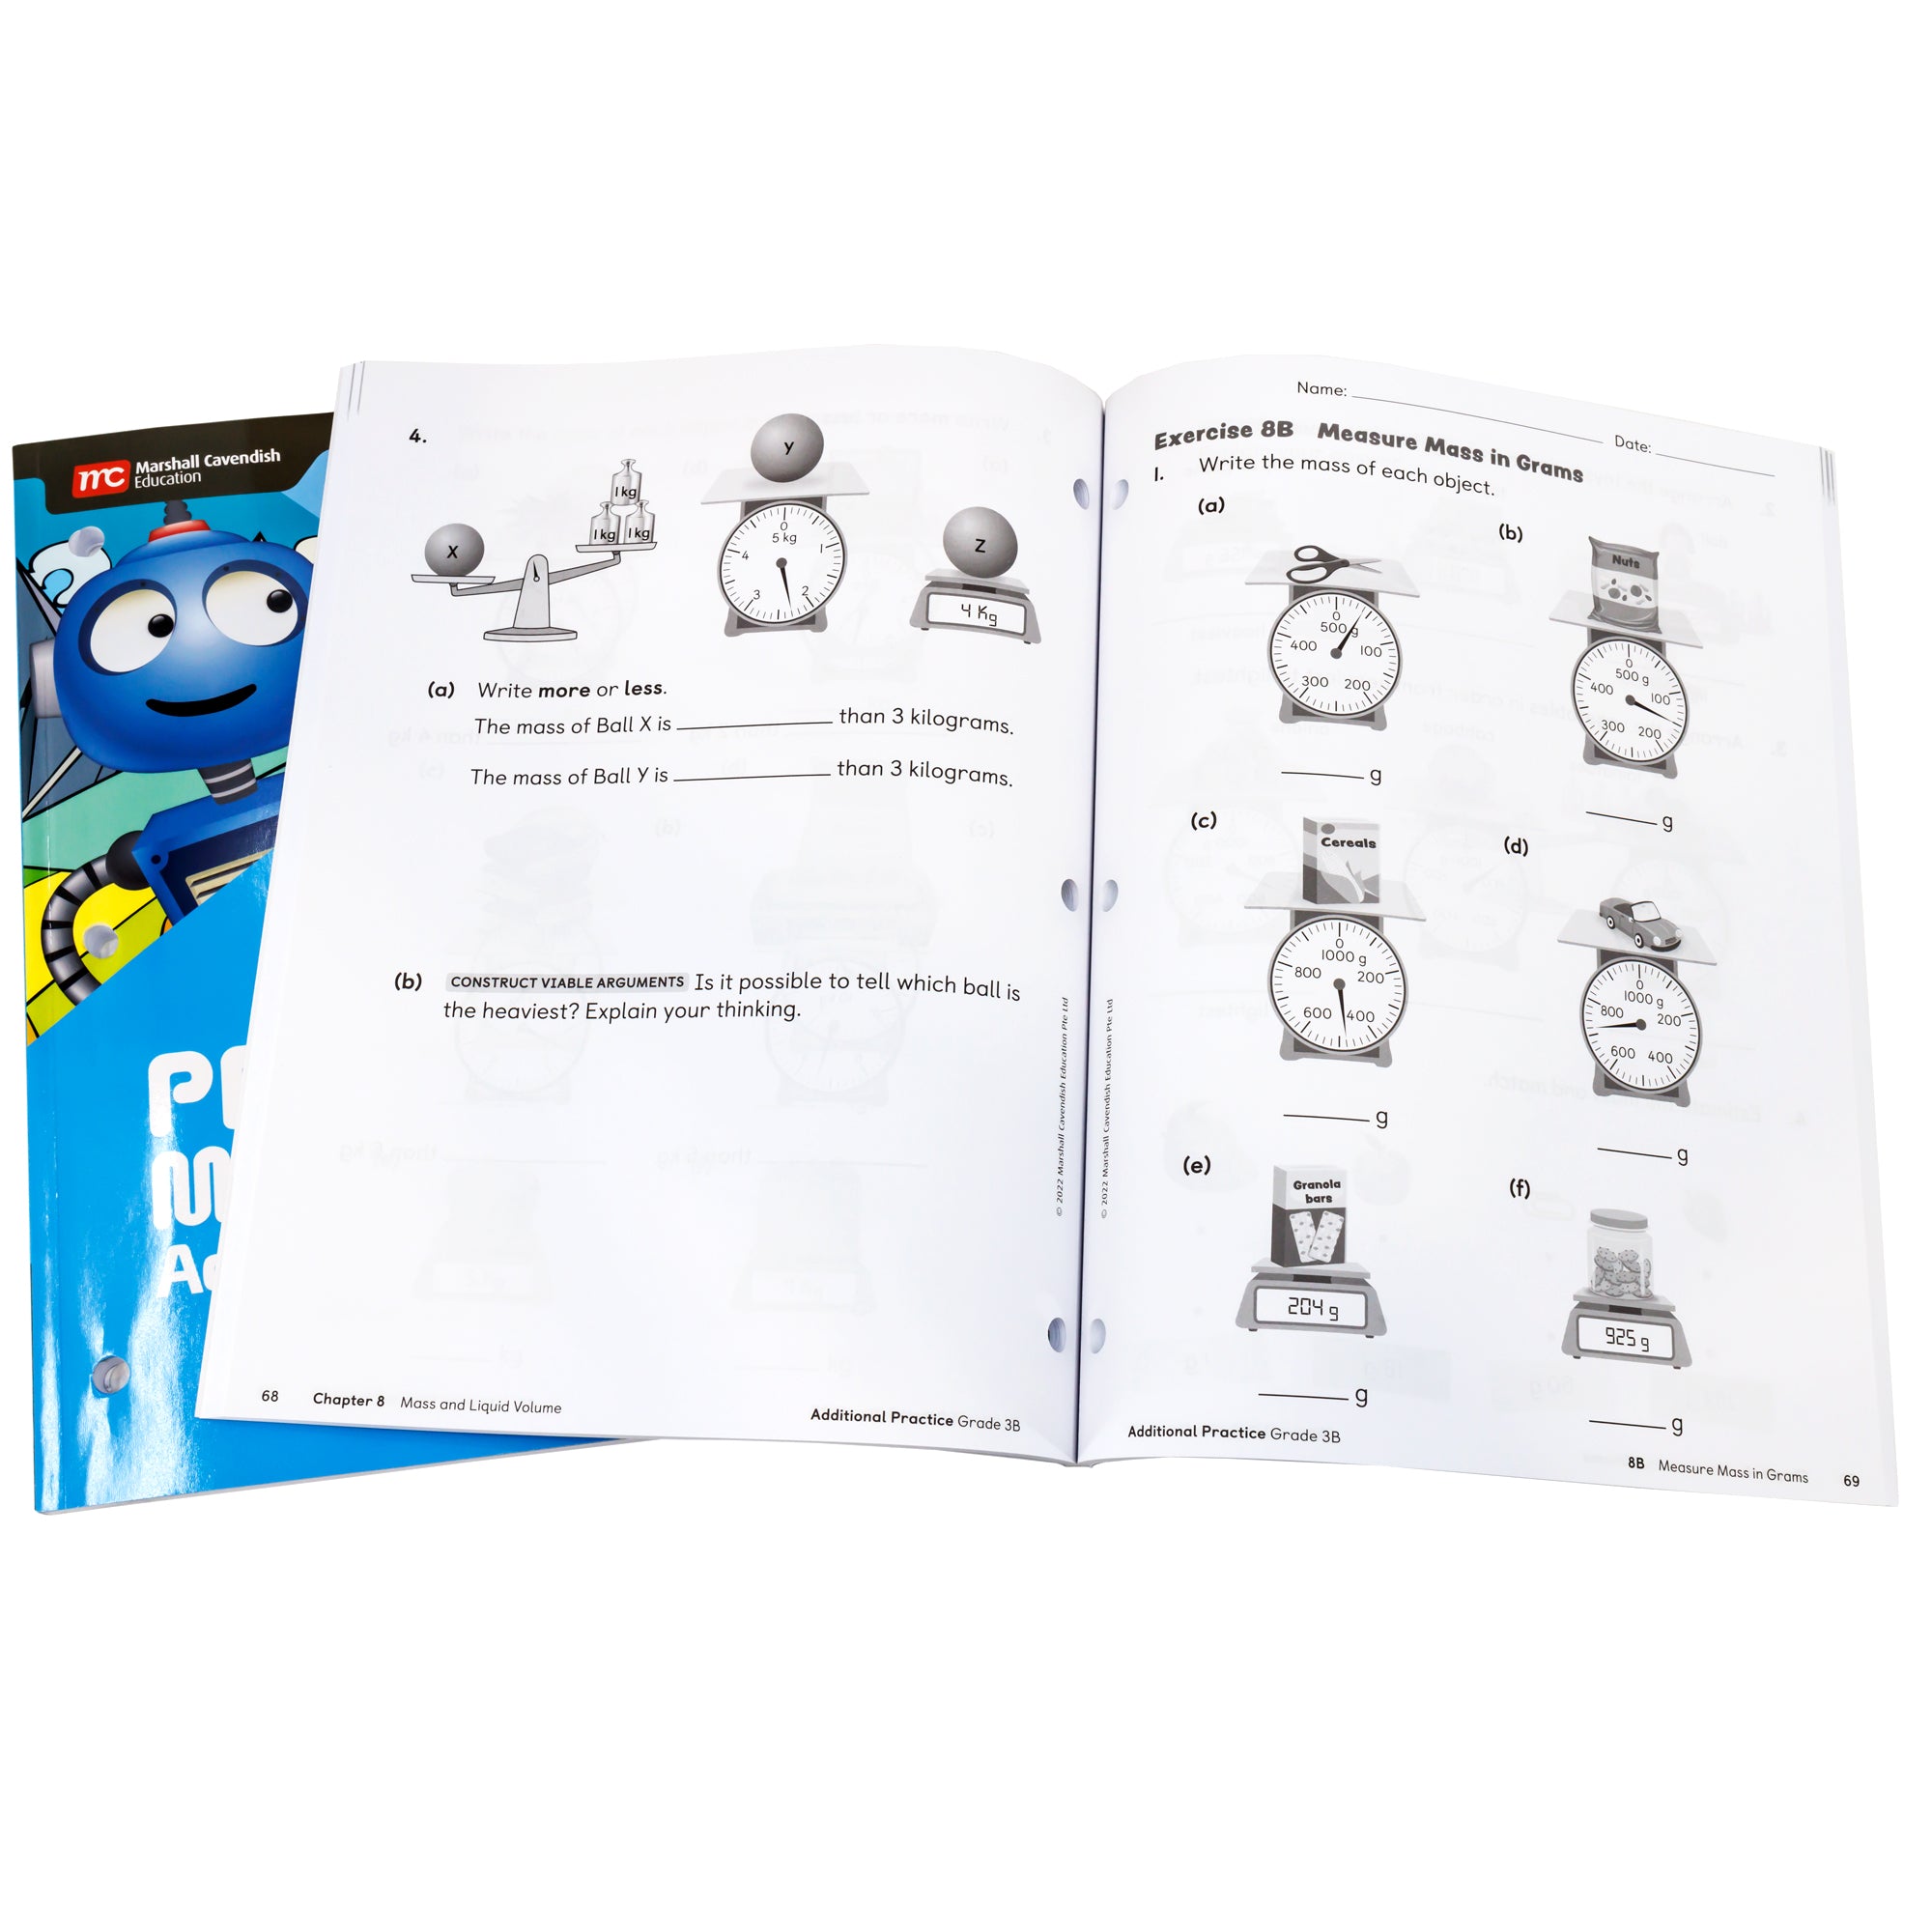 Singapore Primary Math third grade books. On top is an open book showing math problems with an illustrations of scales with different objects and weights. Under the open book and to the left is a closed book with a robot and blue background.